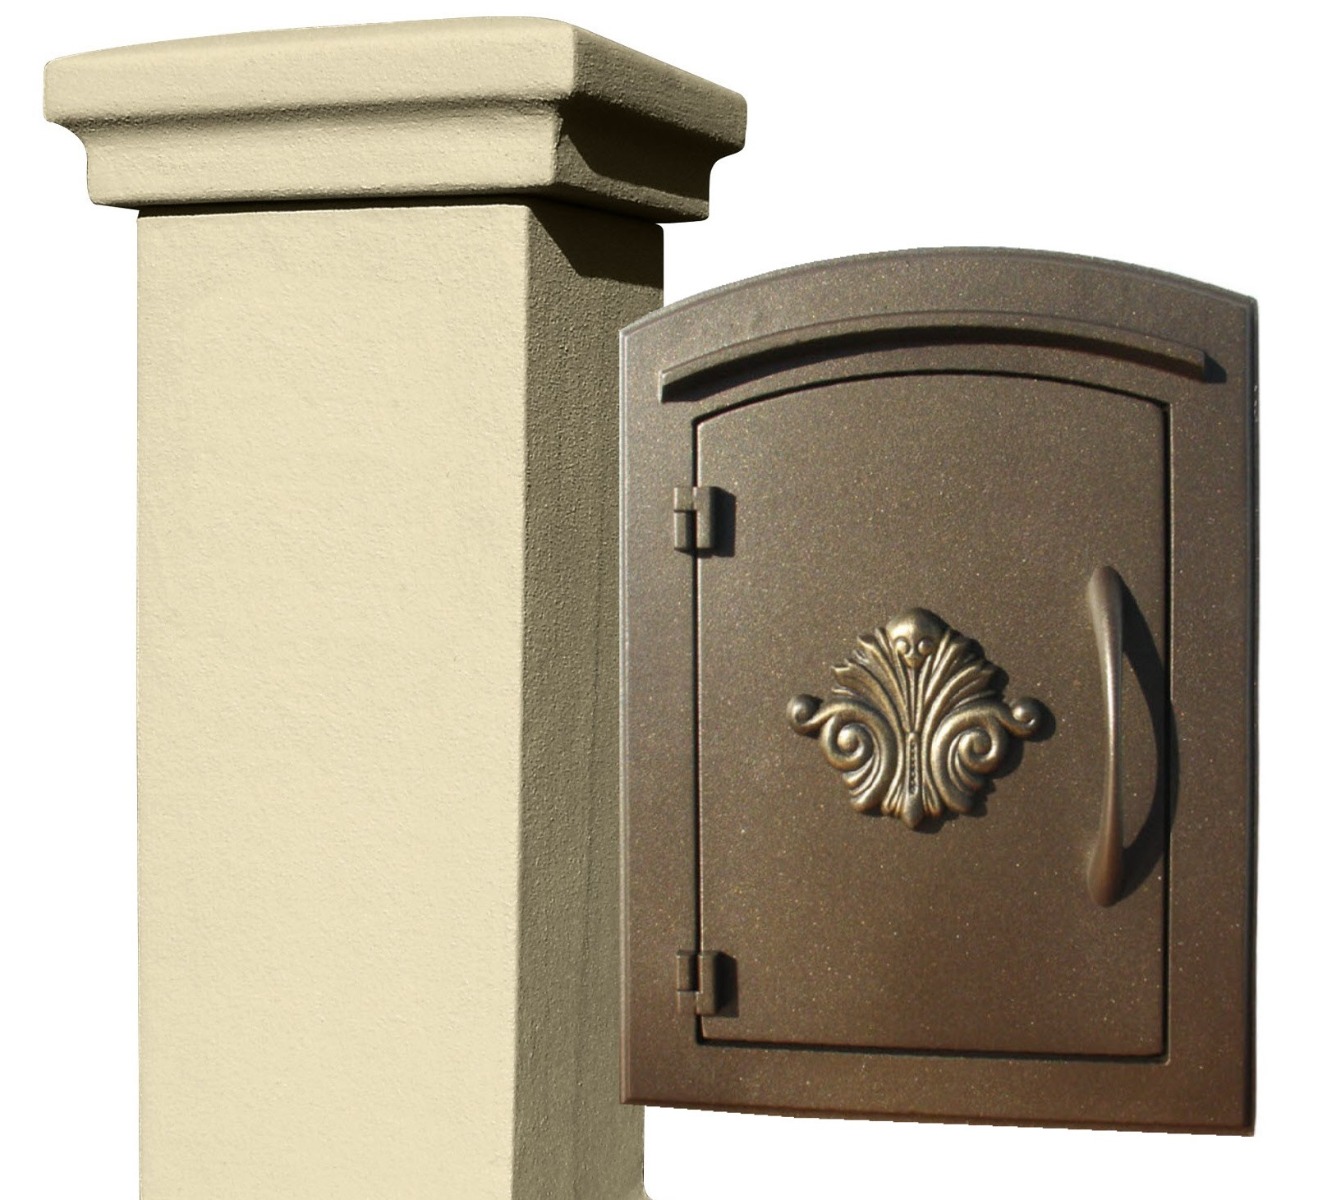 Manchester Security Locking Stucco Column Mailbox with Scroll Emblem - Stucco Column Included (Choose Colors)